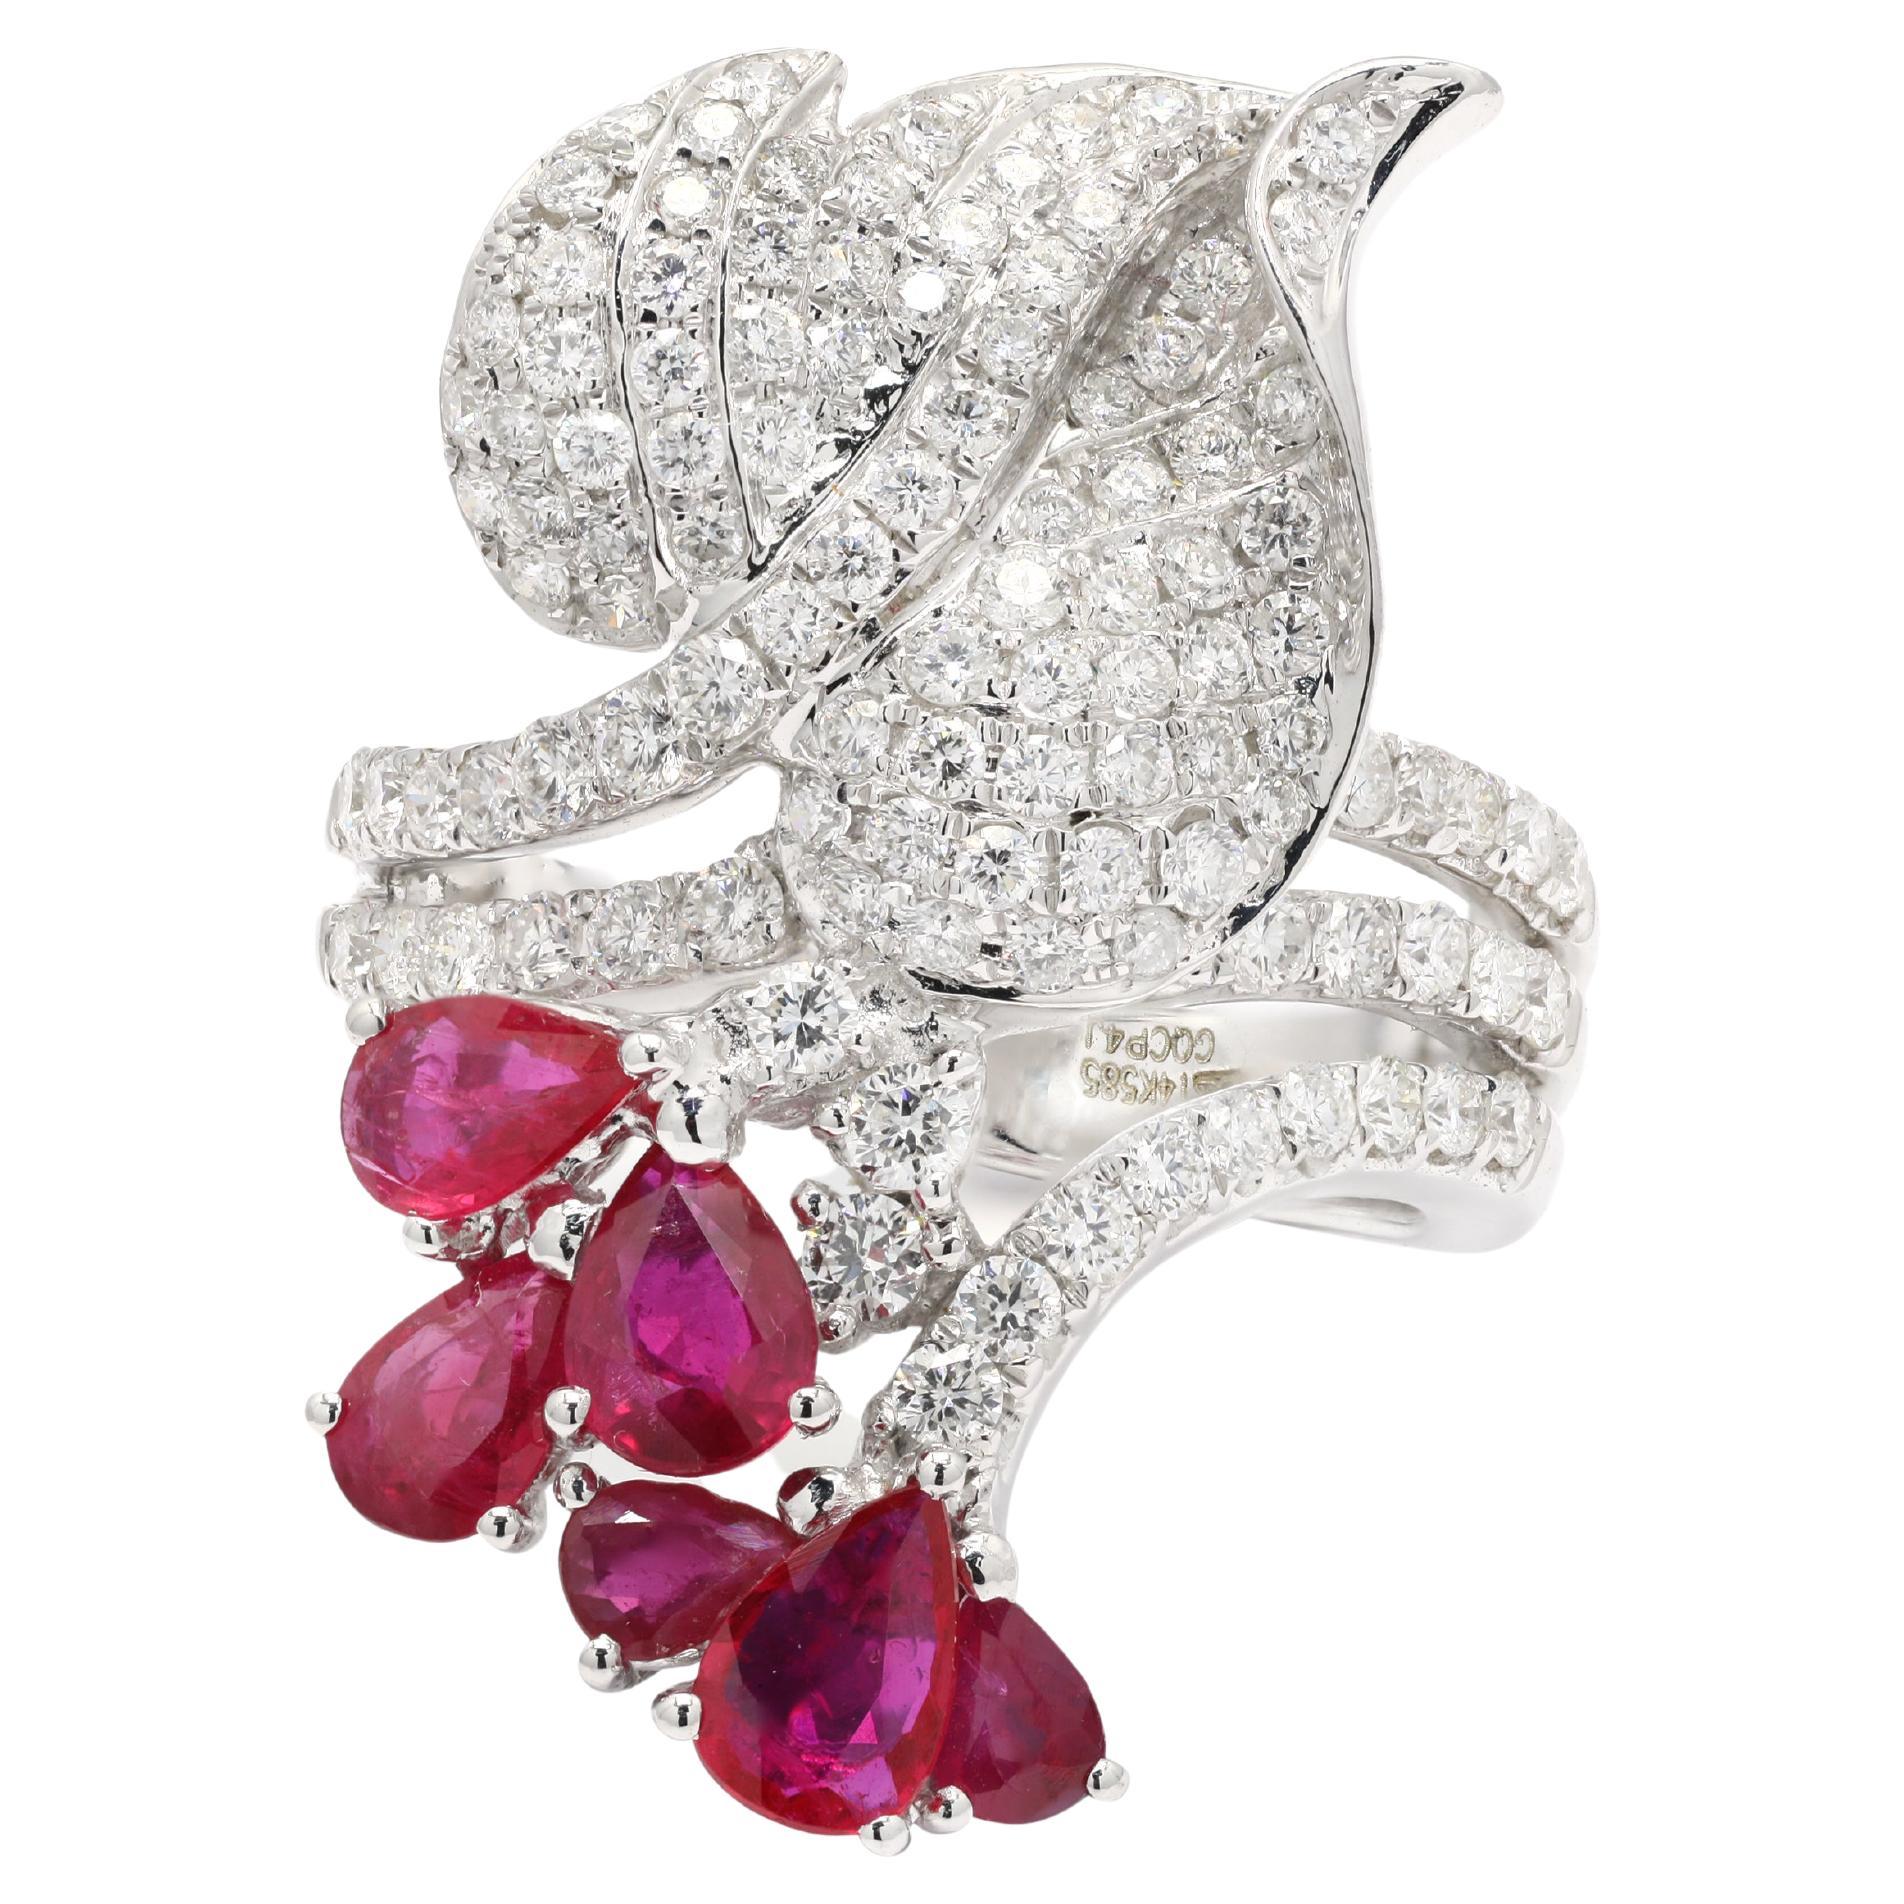 For Sale:  14K White Gold Pear Cut Ruby and Diamond Bridal Ring